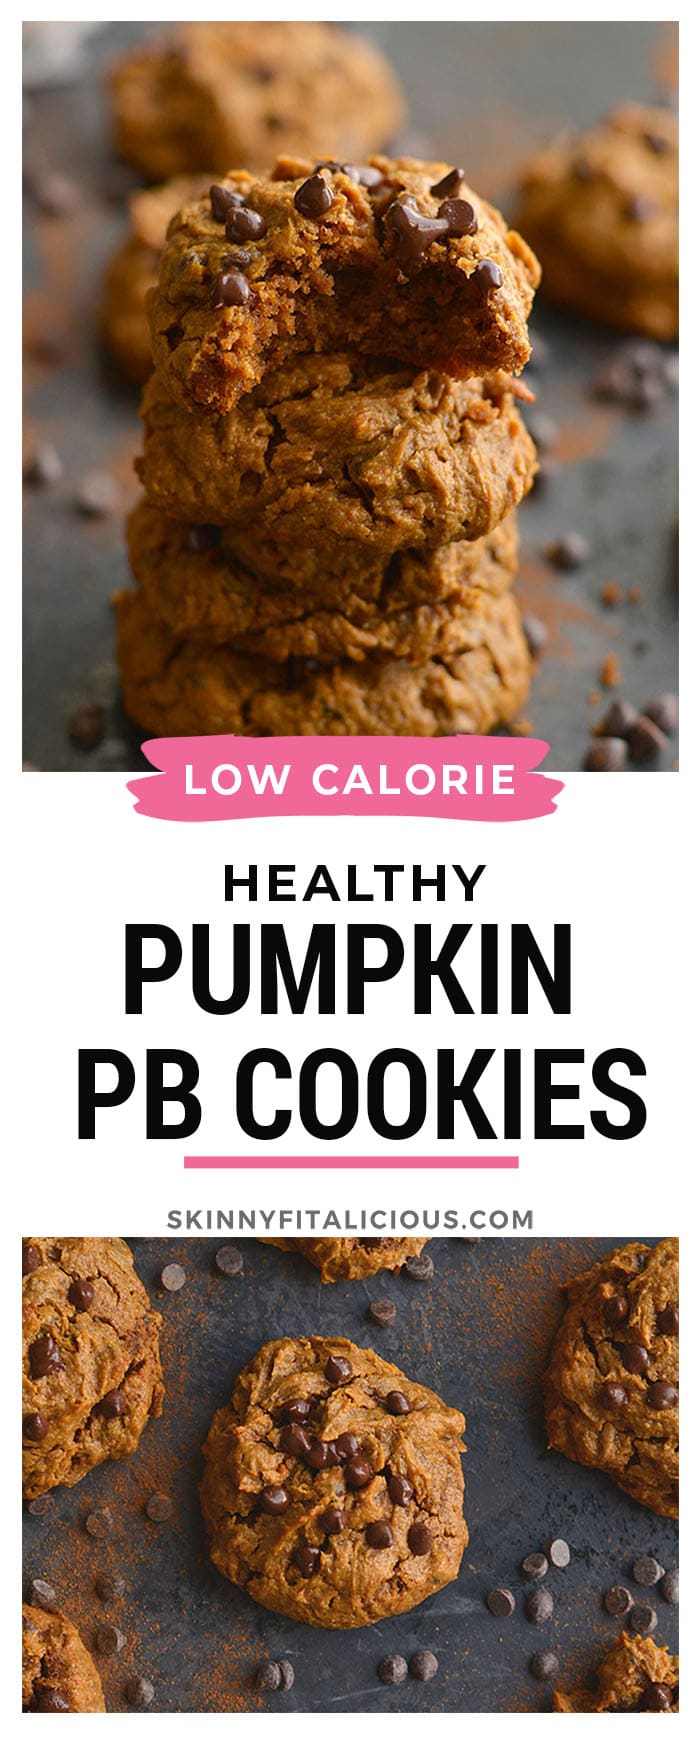 Get your pumpkin and chocolate fix with a creamy, melt-in-your-mouth Healthy Pumpkin Peanut Butter Chocolate Chip Cookies